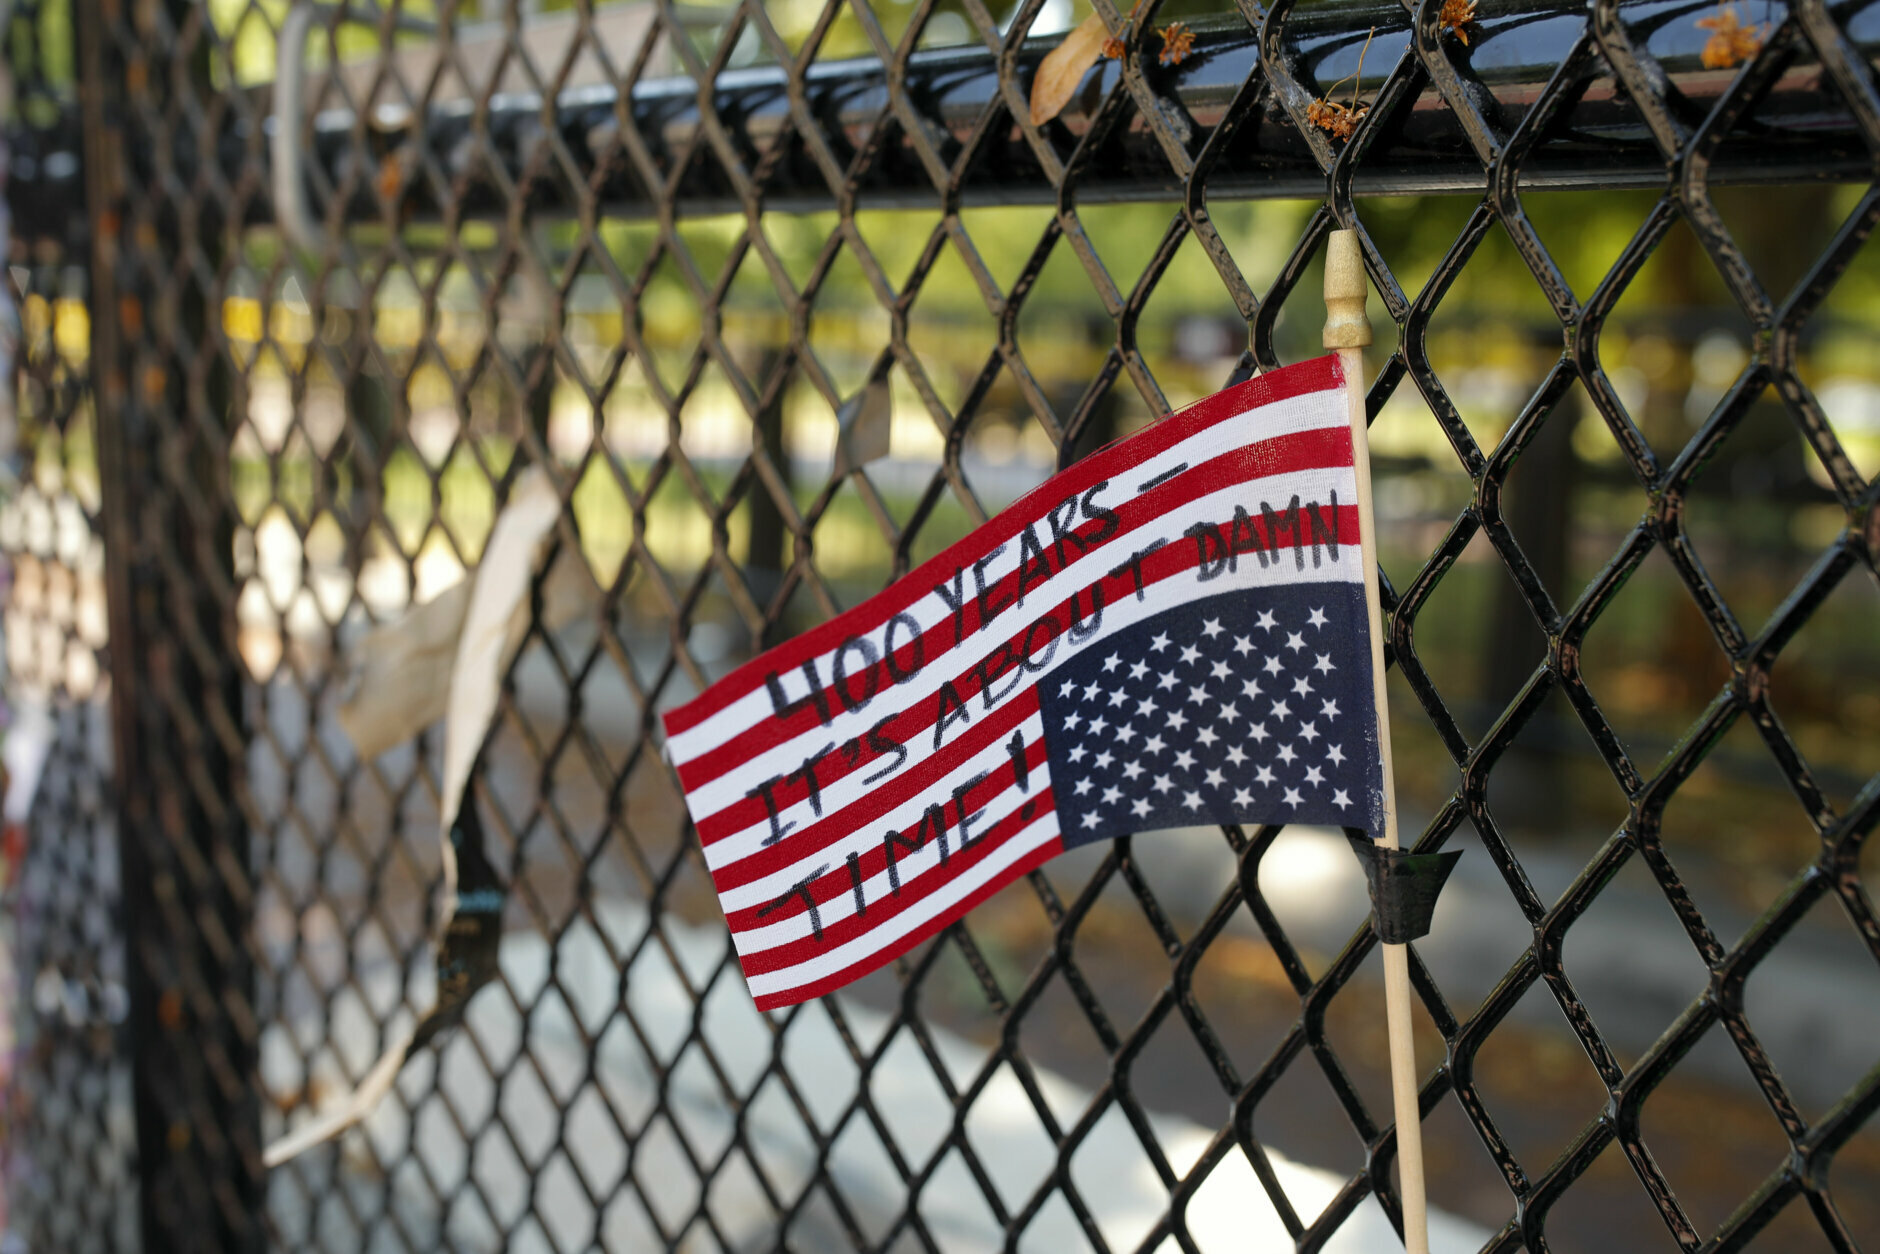 An American flag is seen upside down in a fence near the White House as demonstrators protest Sunday, June 7, 2020, in Washington, over the death of George Floyd, a black man who was in police custody in Minneapolis. Floyd died after being restrained by Minneapolis police officers on Memorial Day. (AP Photo/Maya Alleruzzo)